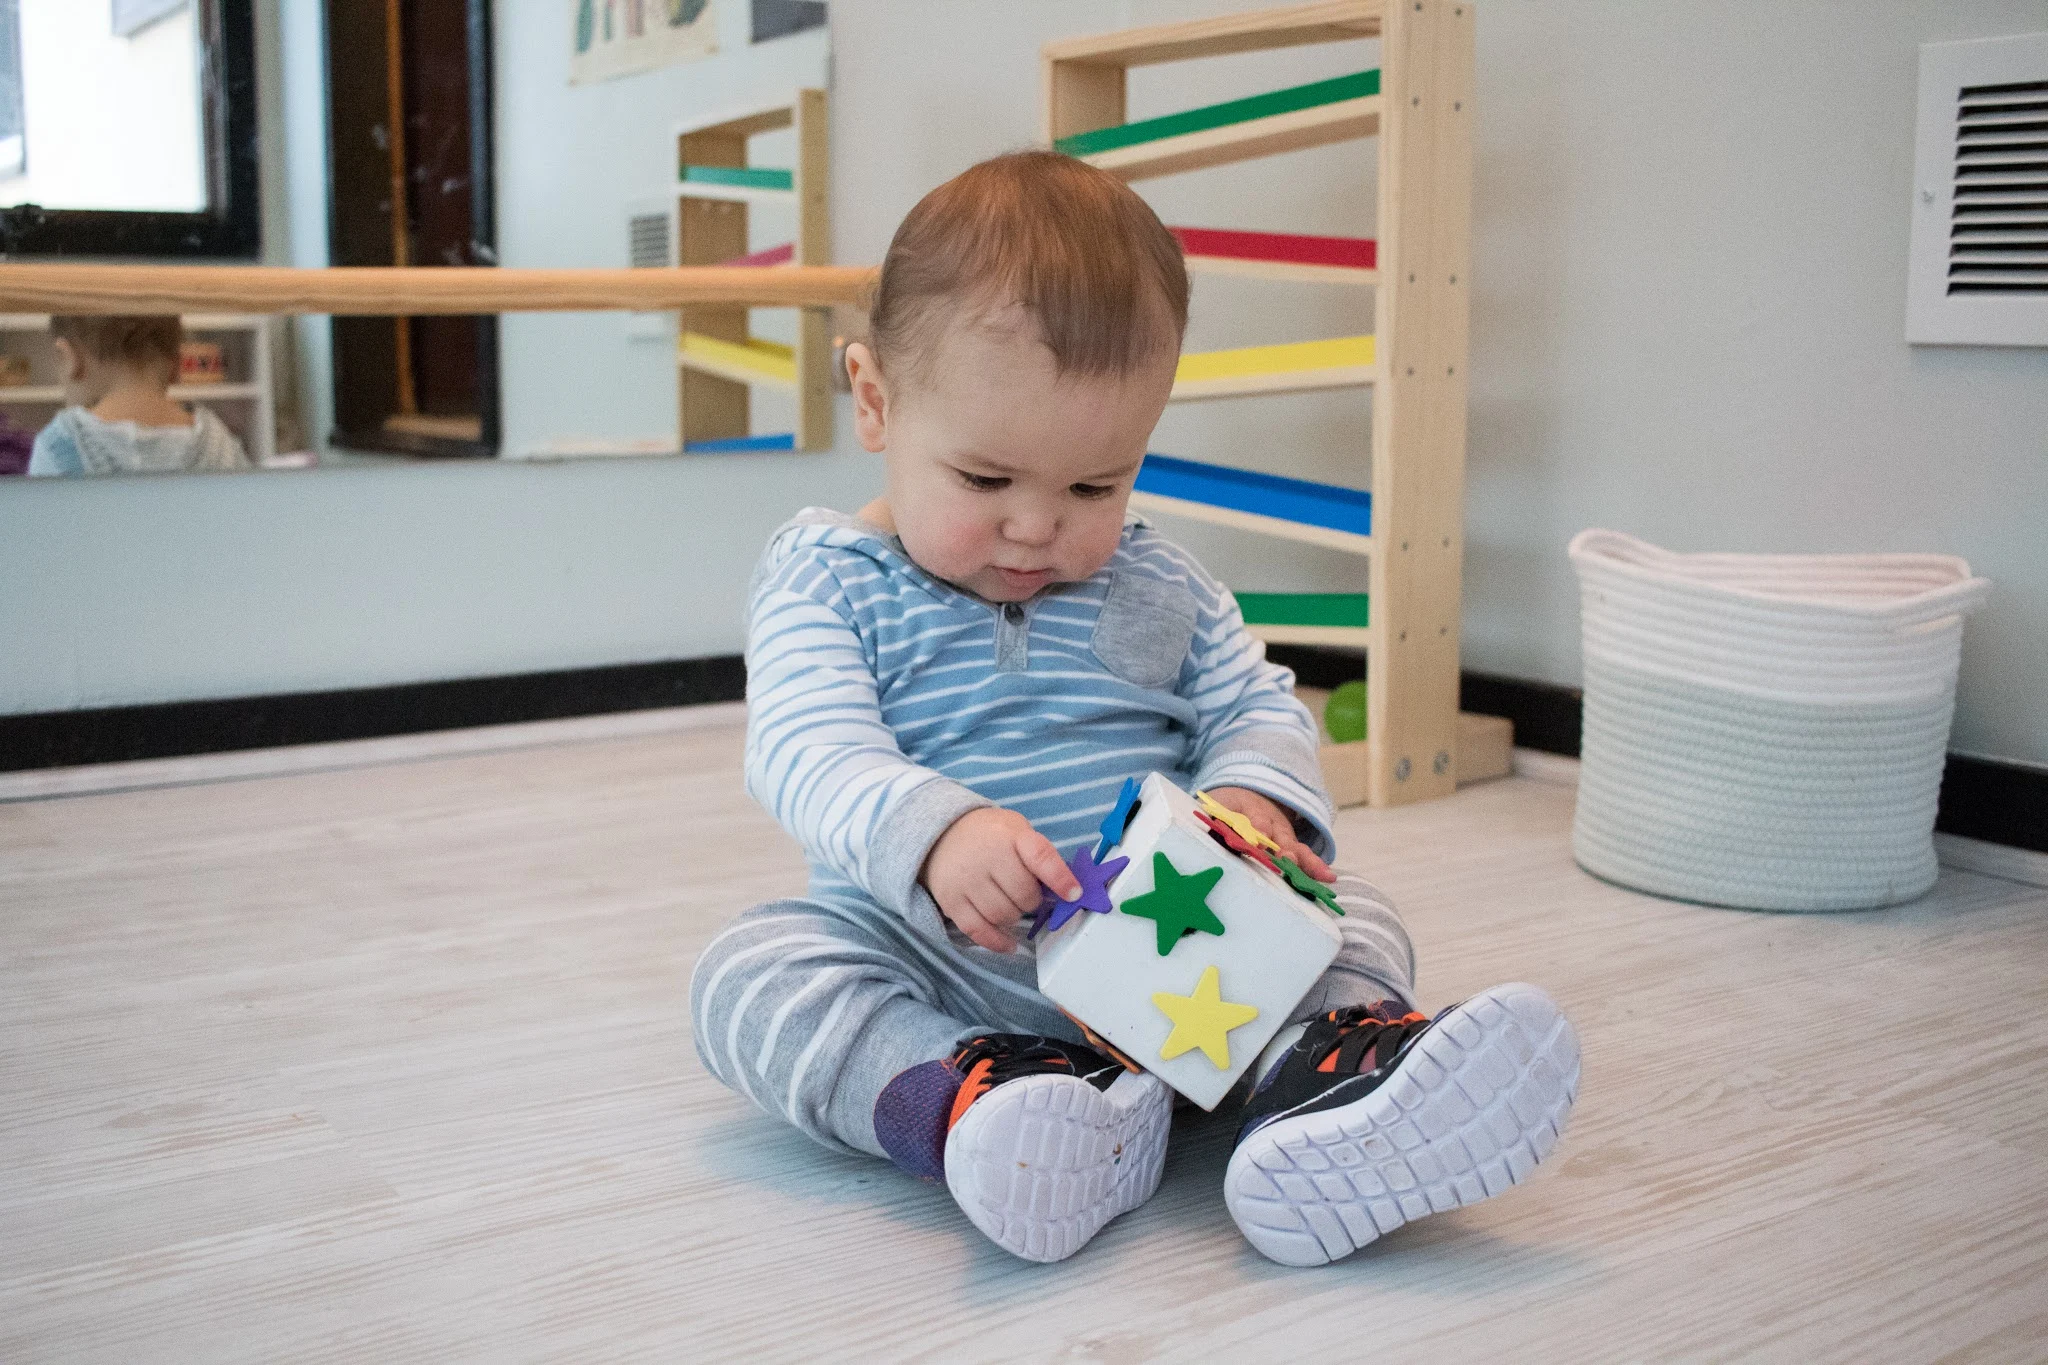 An older baby sits in his Montessori playroom using a DIY velcro block covered in wooden stars. He looks down using fine motor skills to pull one of the stars from the block as he plays with the Montessori friendly DIY.